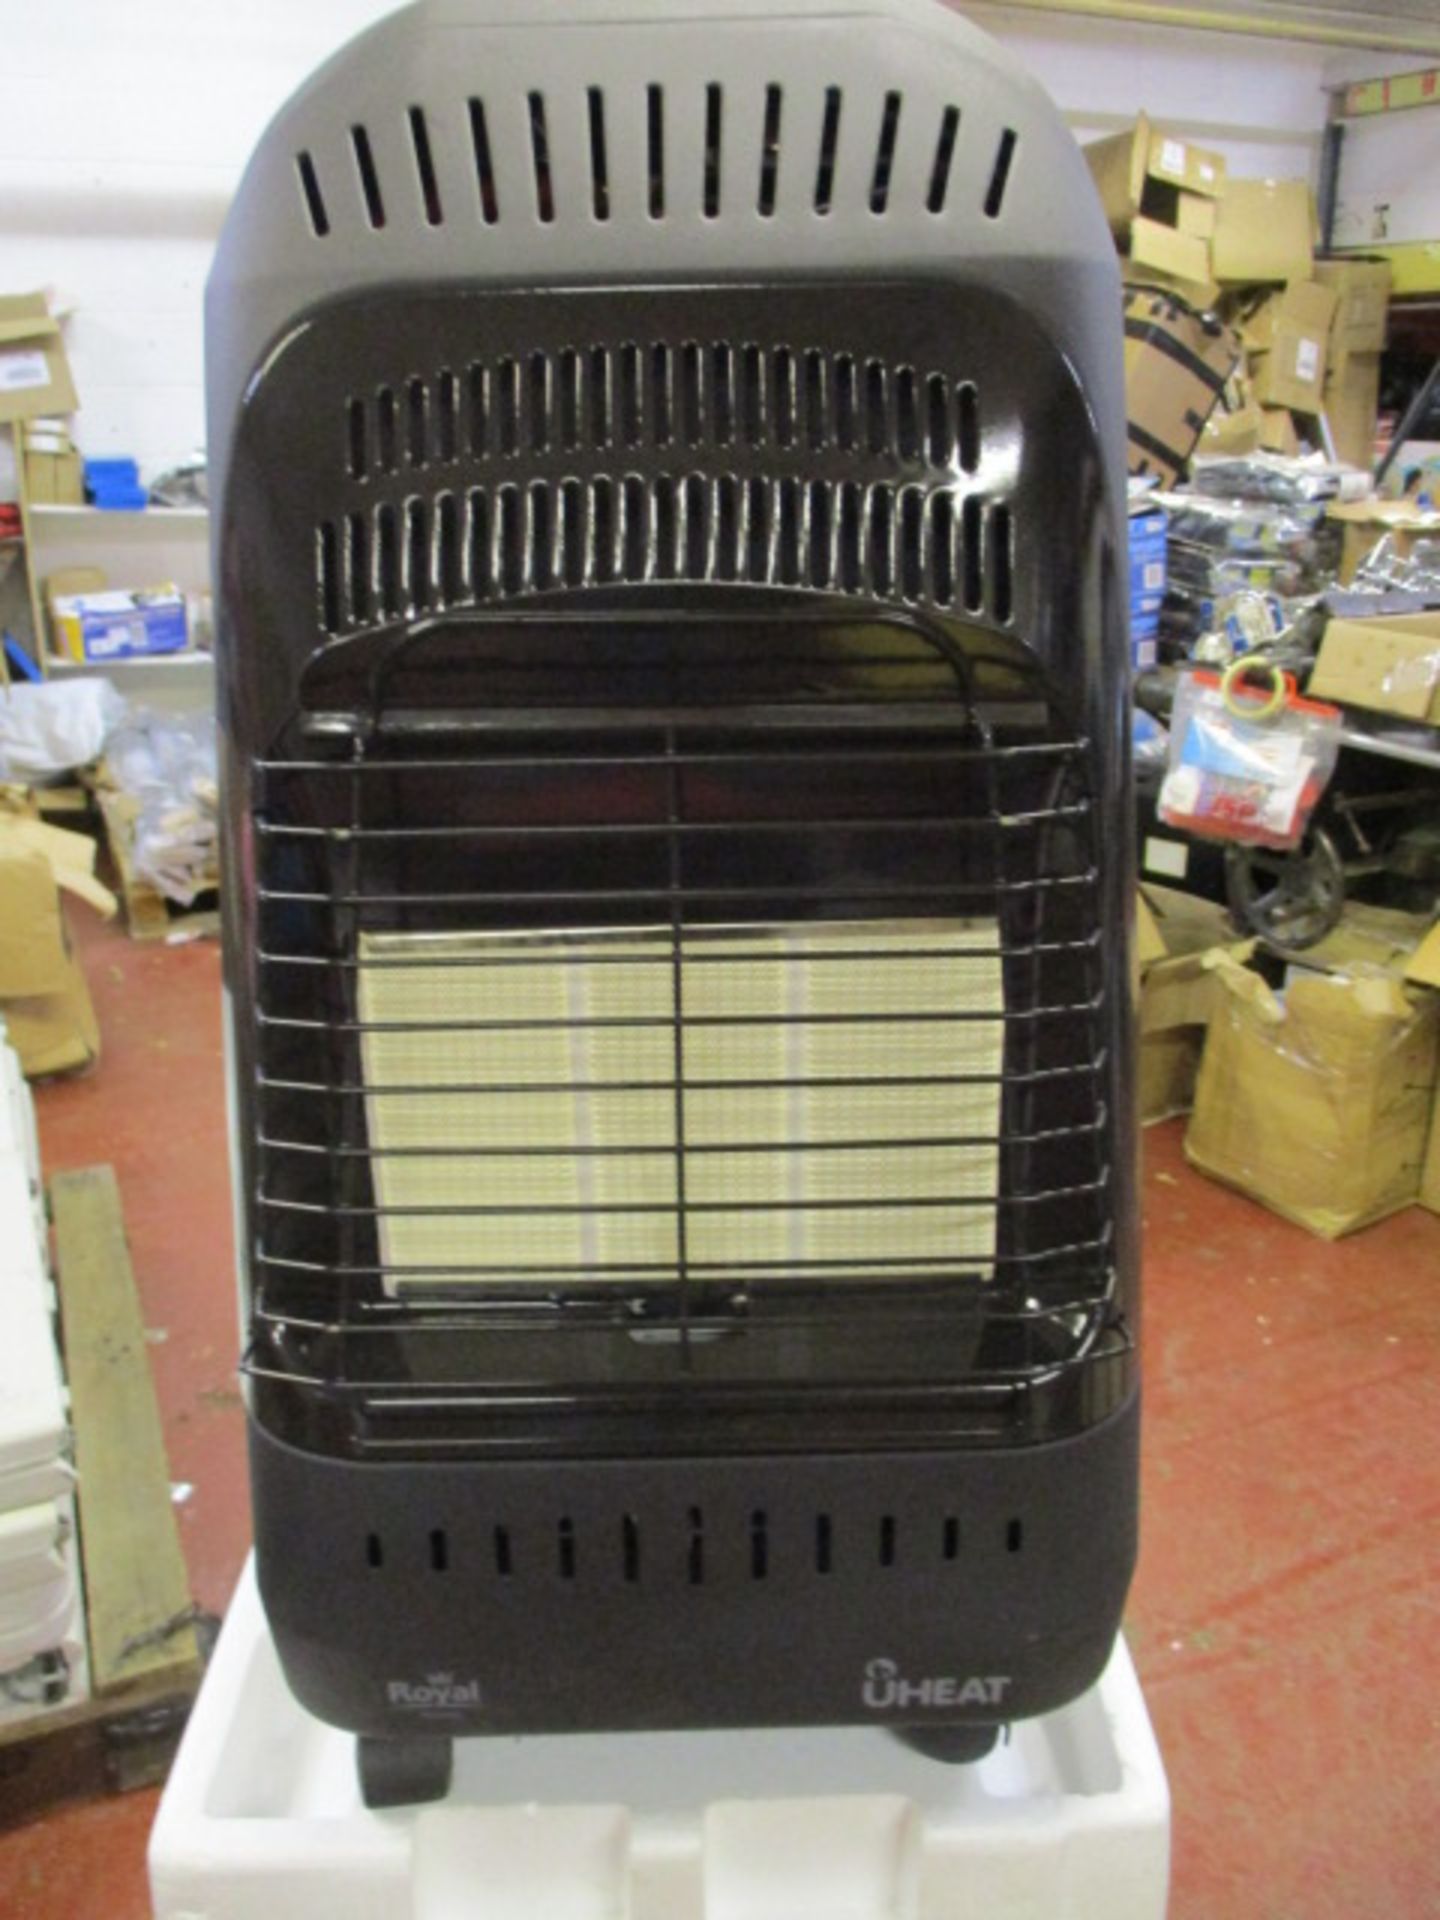 Royal At home Uheat gas heater boxed new unused RRP £139.99